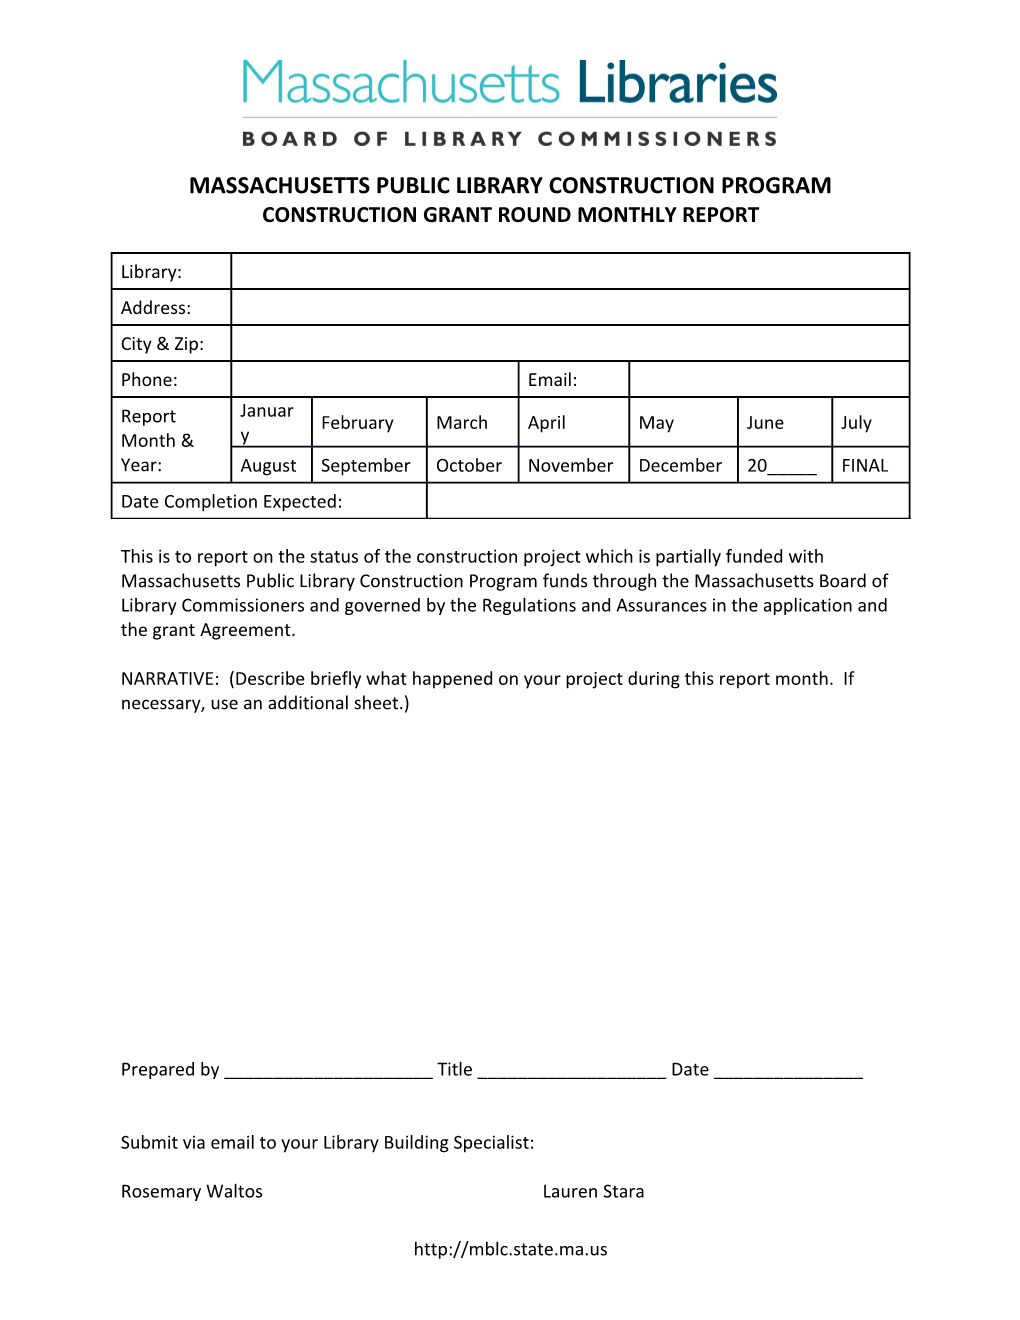 MPLCP Construction Grant Round Monthly Report